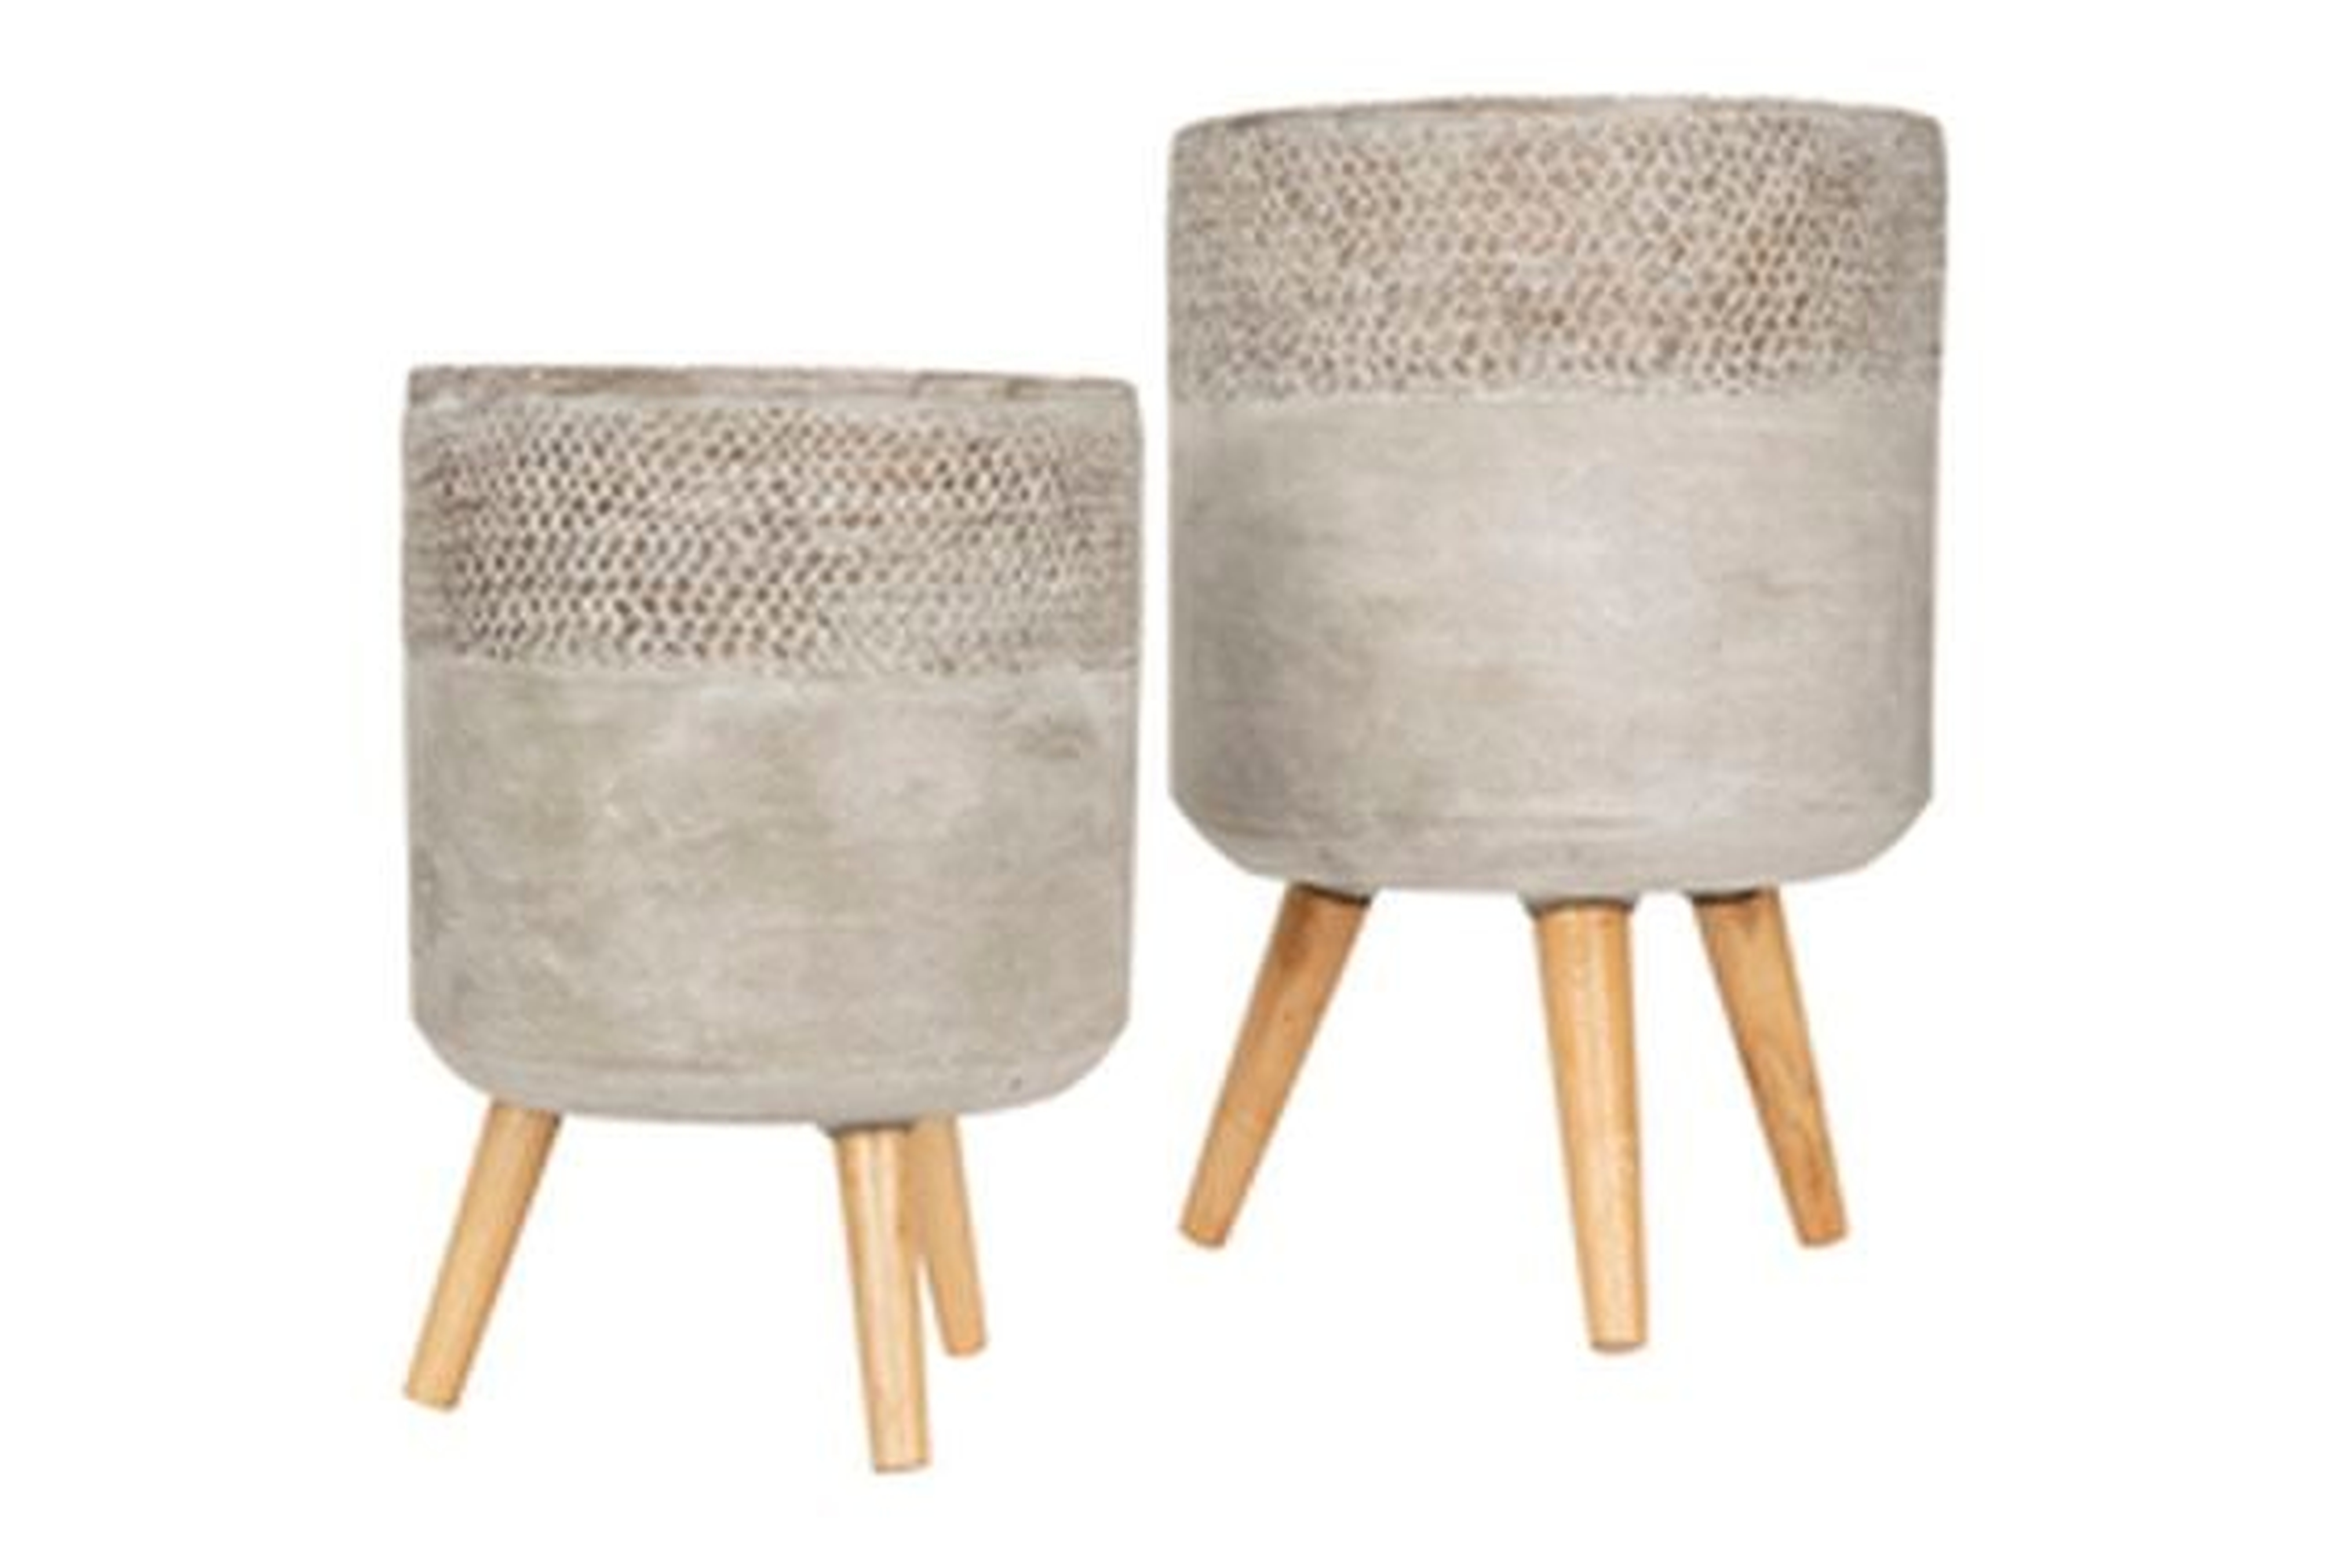 Grey Cement Planter with Removable Wood Legs (Set of 2 Sizes) - Nomad Home